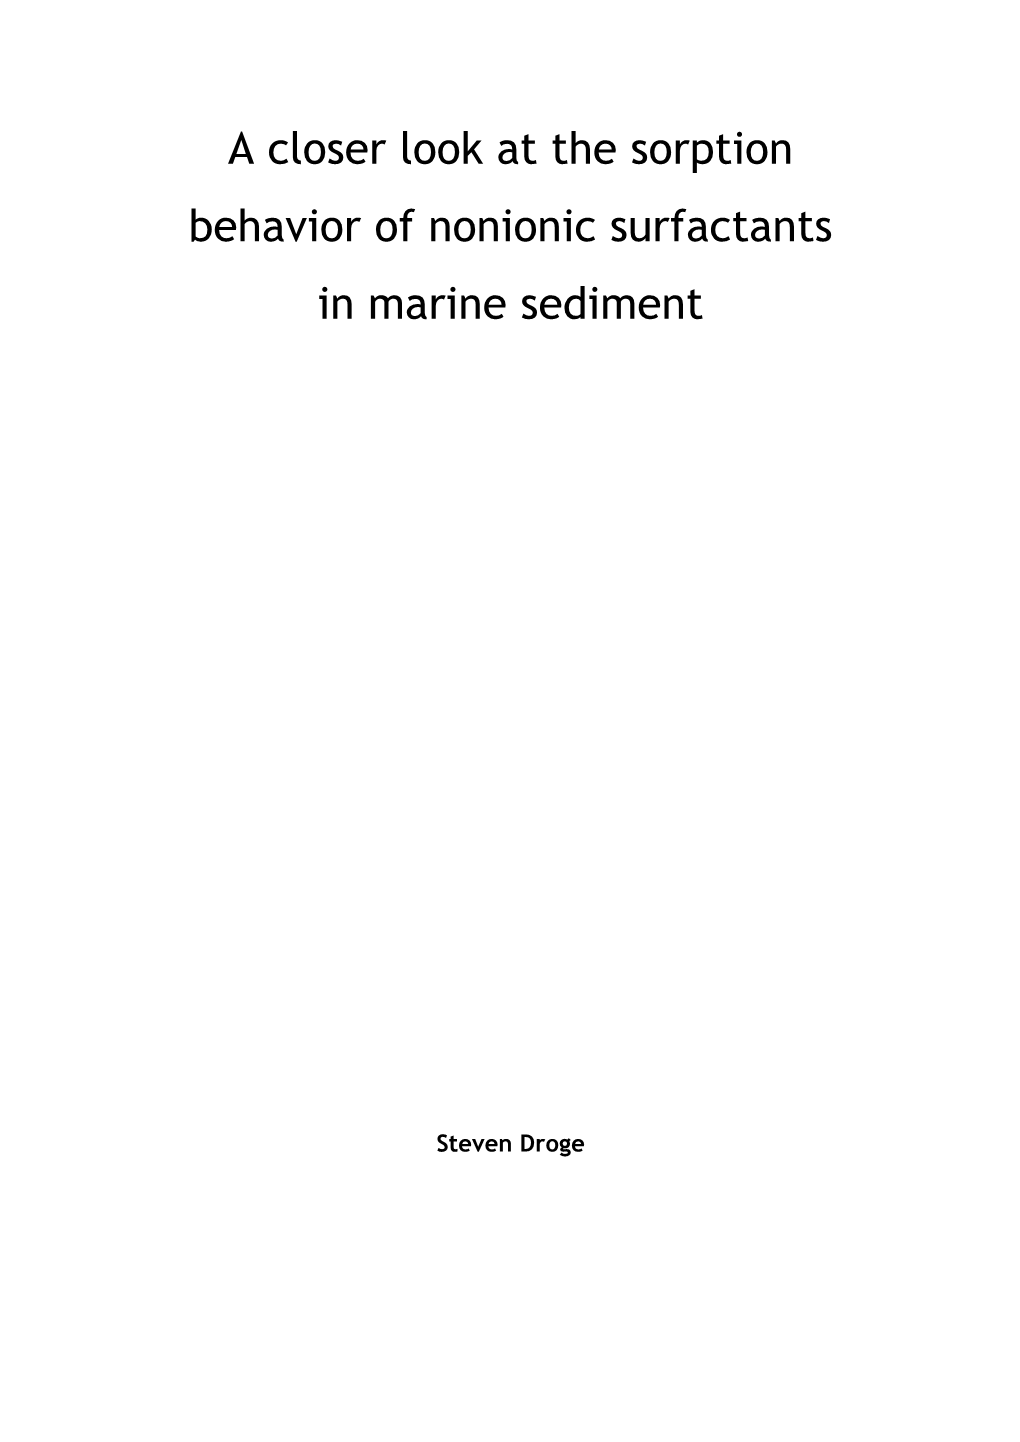 A Closer Look at the Sorption Behavior of Nonionic Surfactants in Marine Sediment